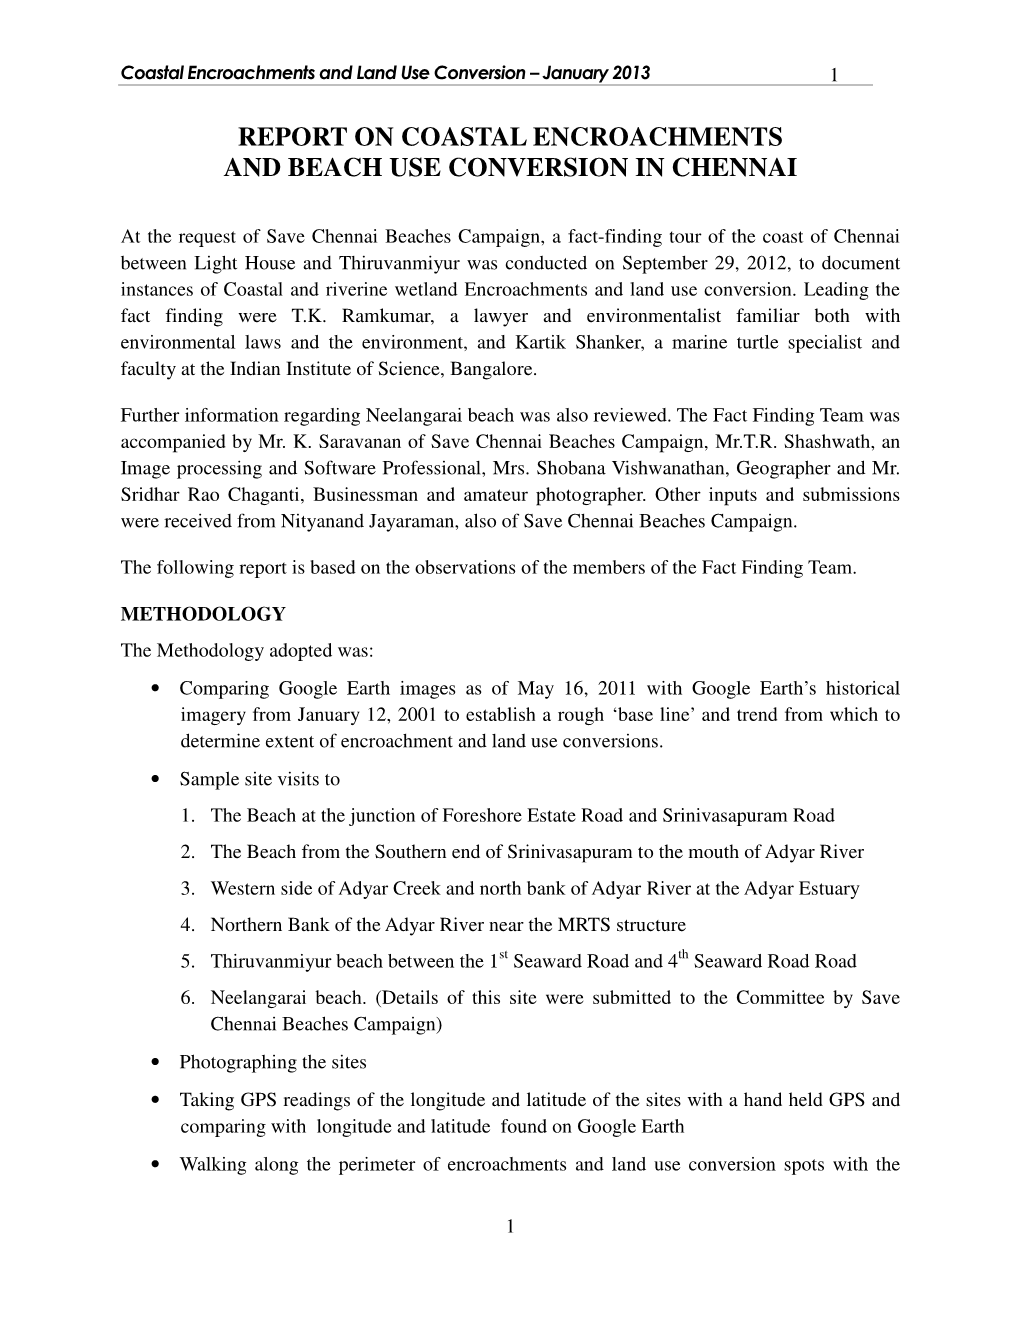 Report on Coastal Encroachments and Beach Use Conversion in Chennai